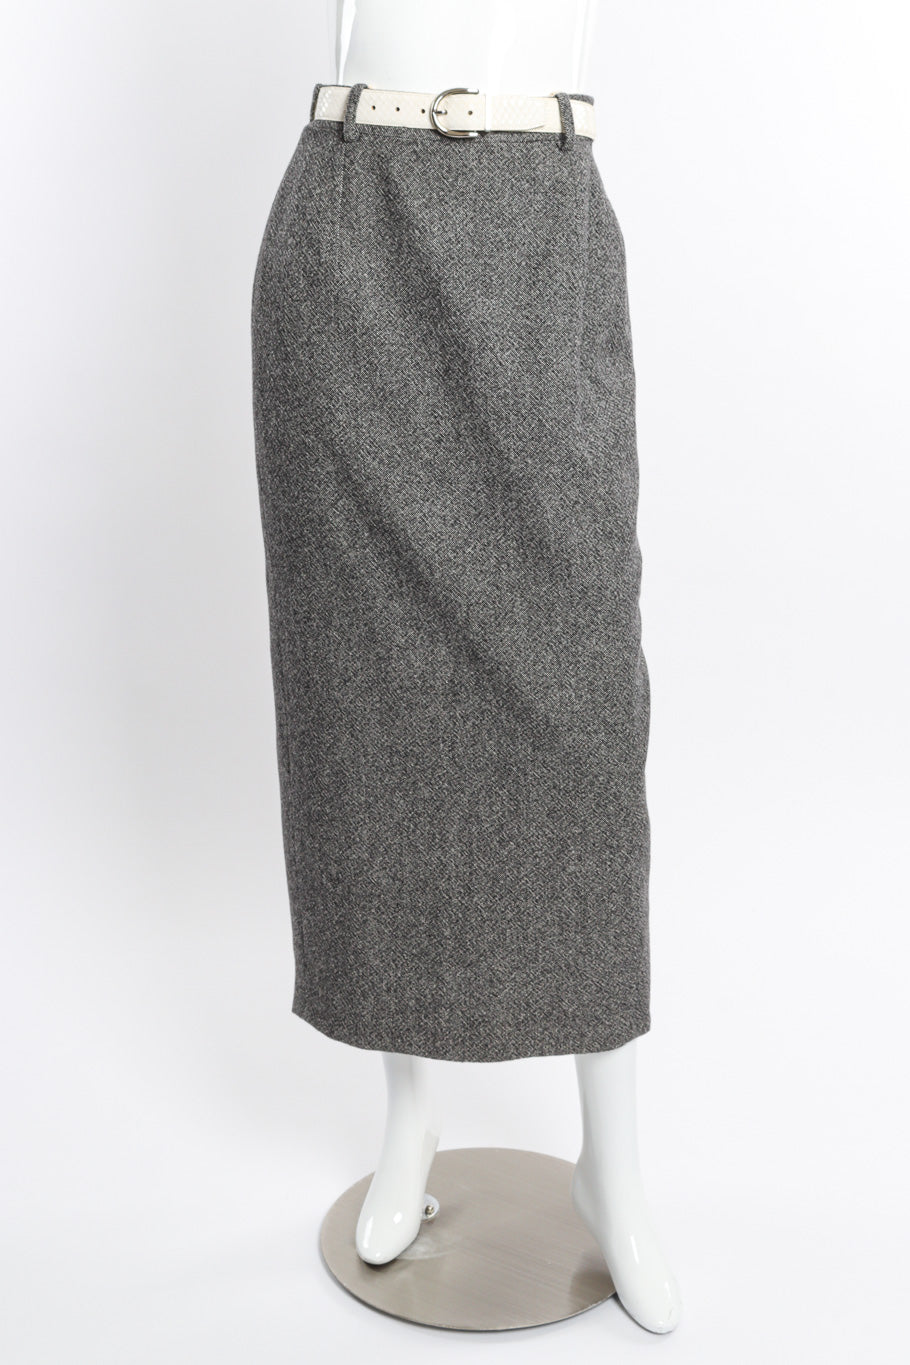 Wool Jacket & Wrap Skirt Suit by Christian Dior on mannequin skirt only front @recessla